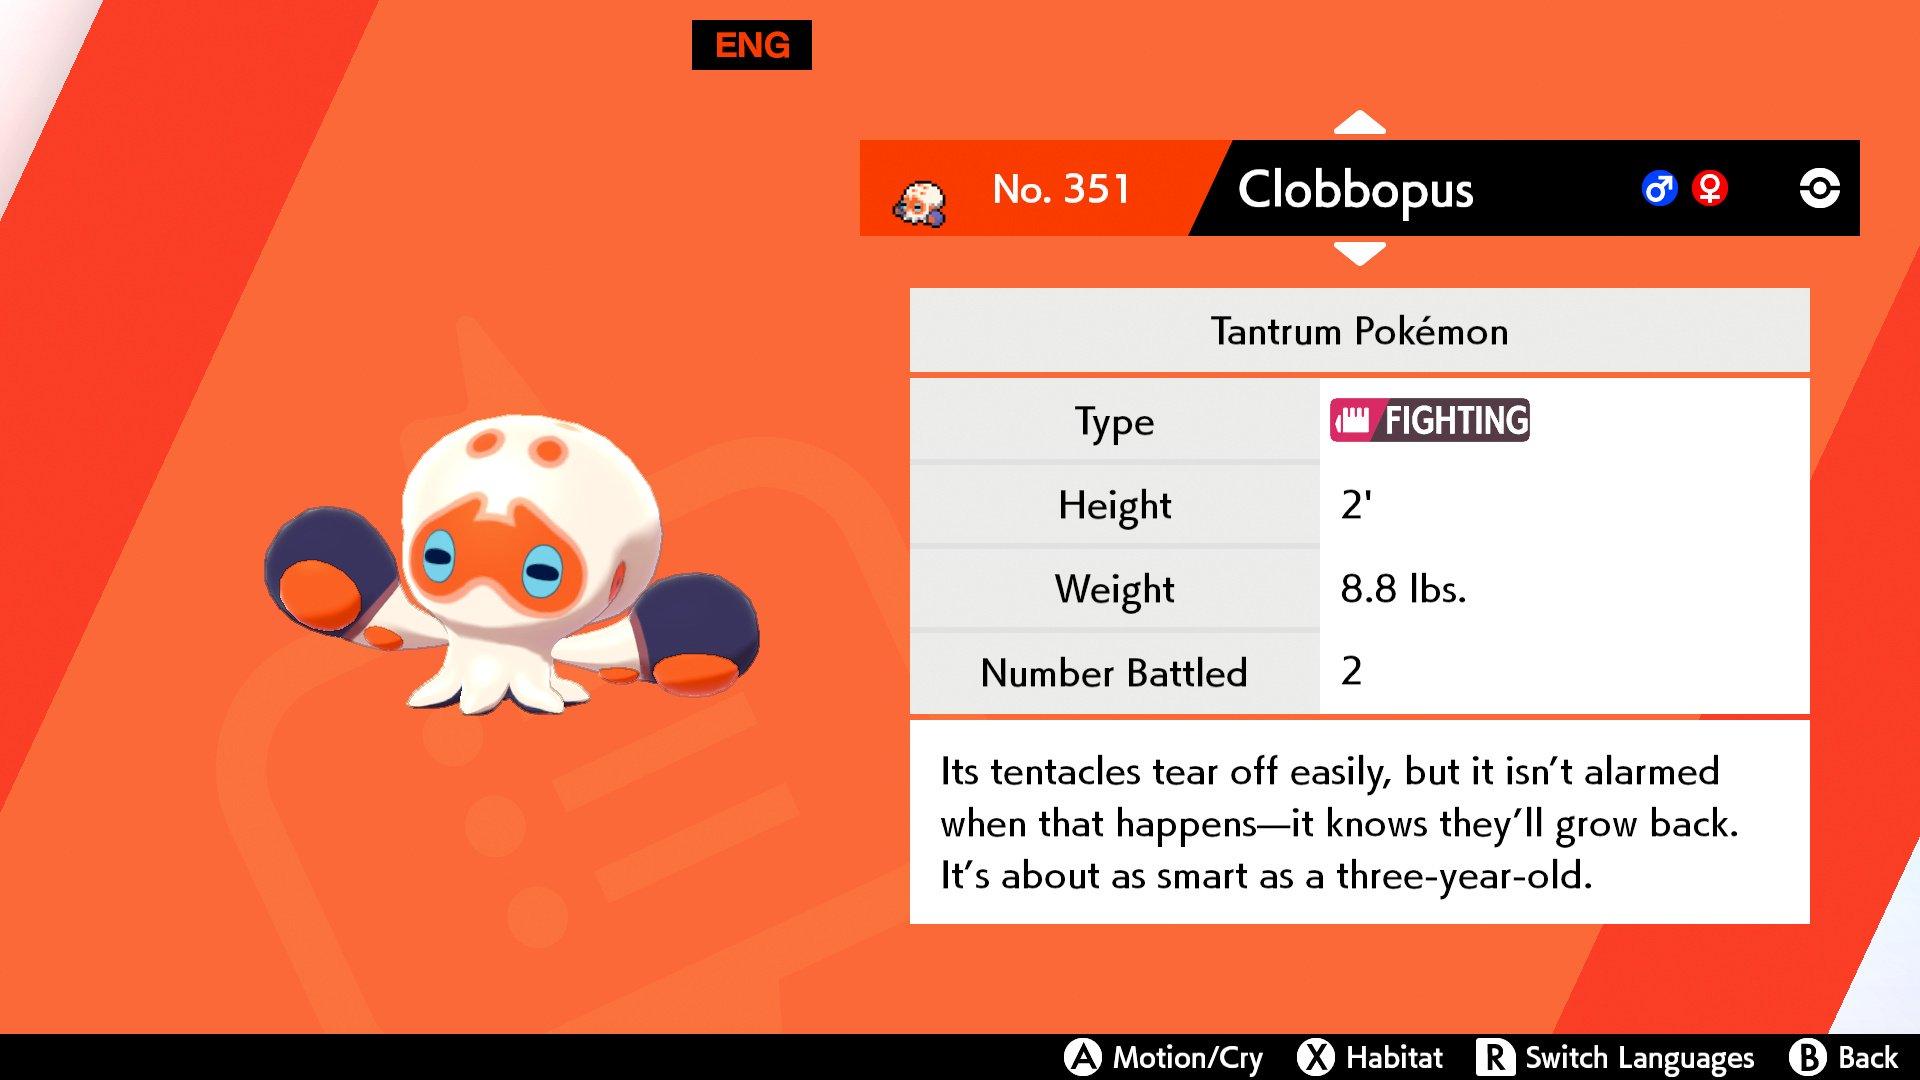 Pokémon Sword And Shield's Clobbopus: How To Find And Evolve